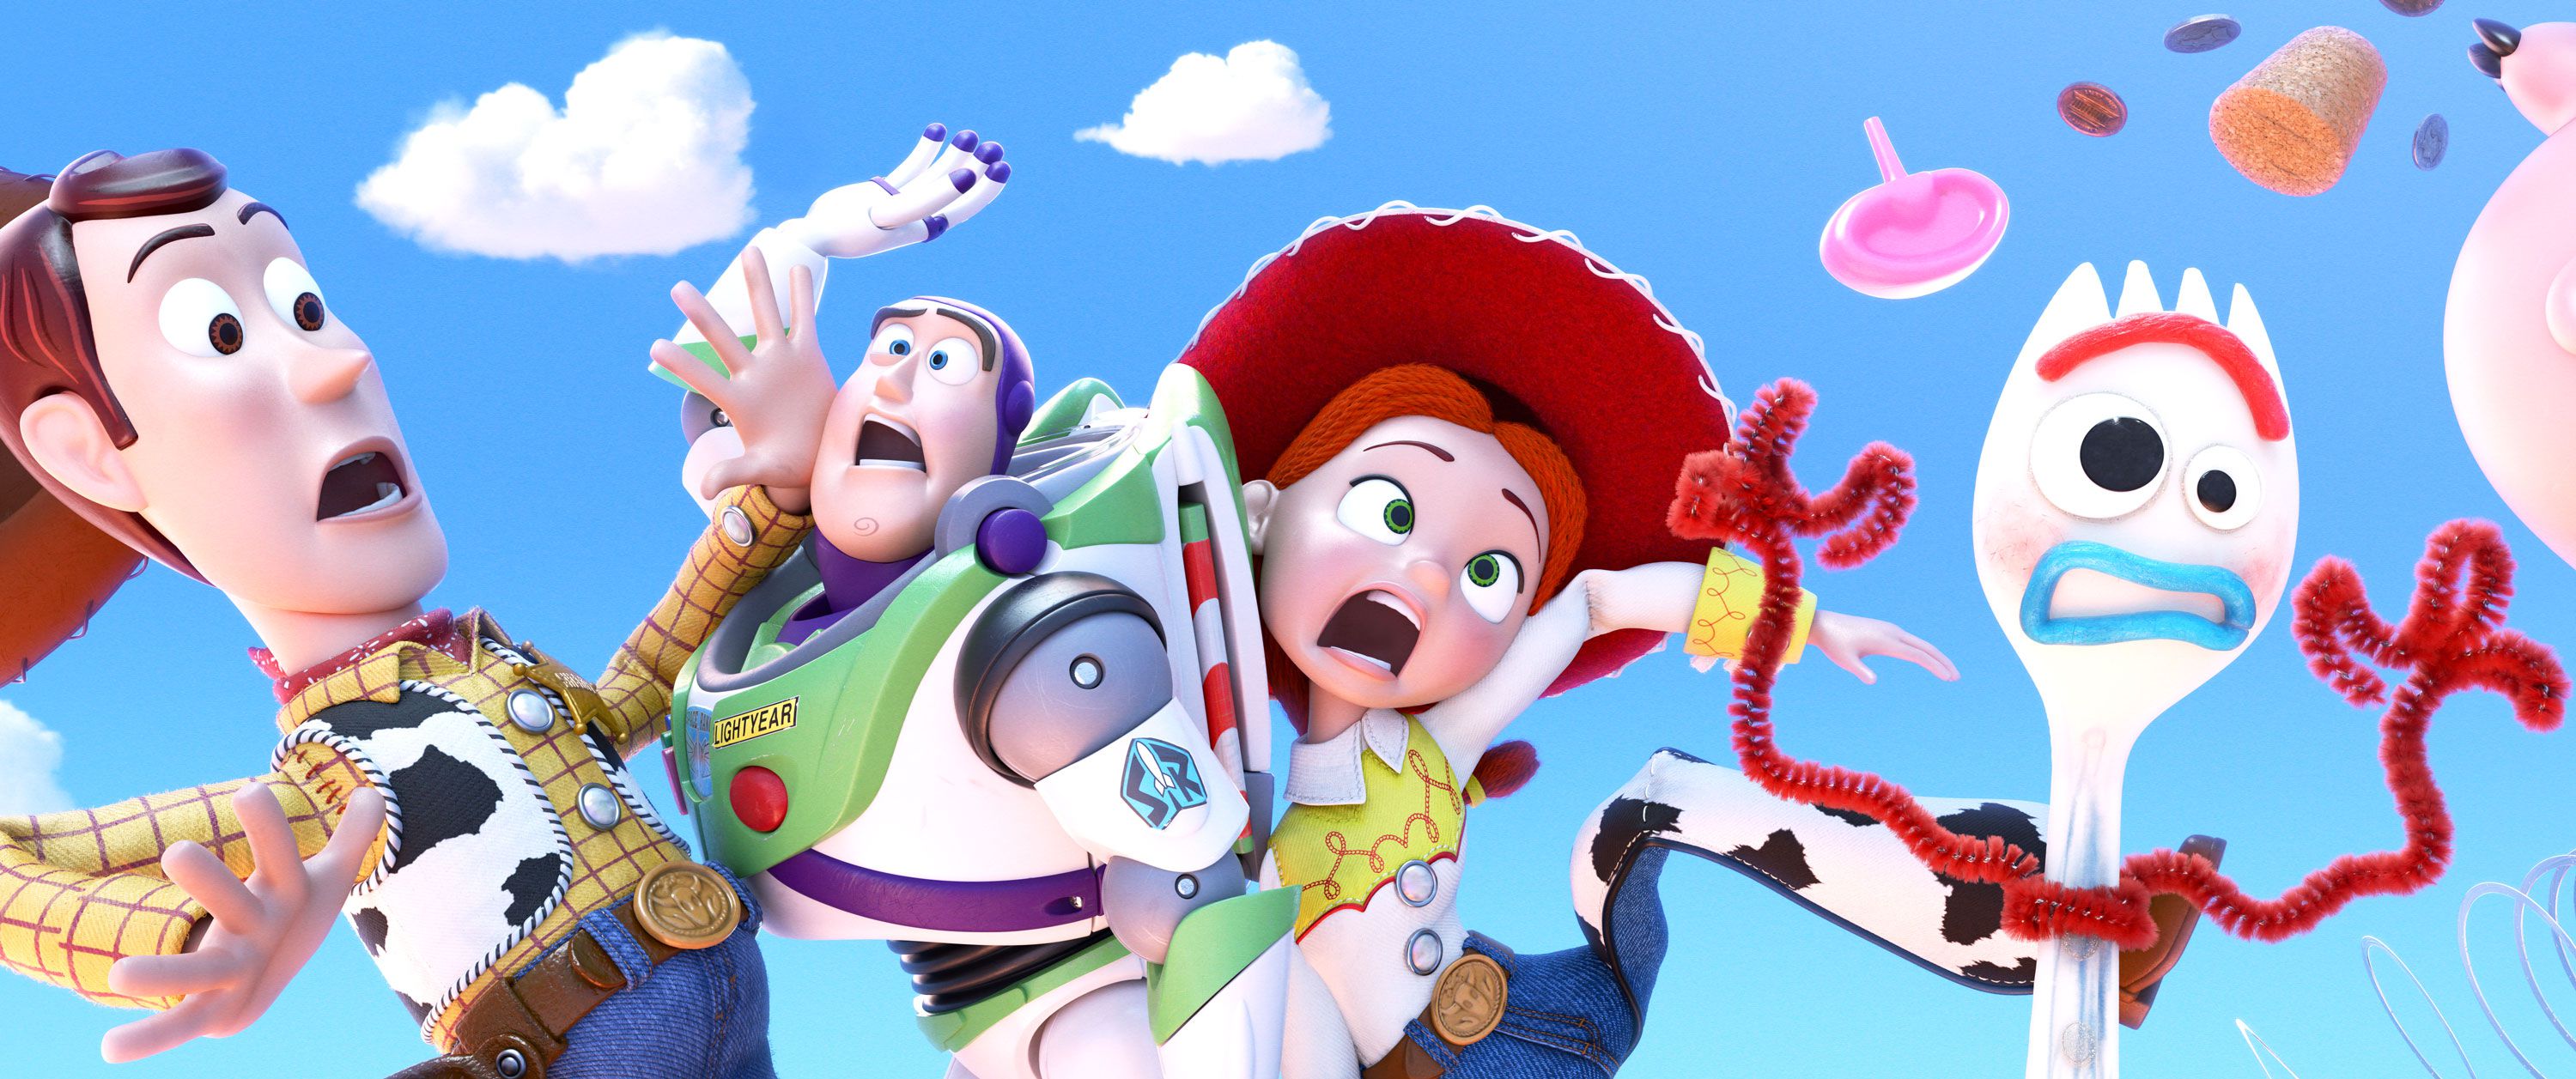 Toy Story 4 Super Bowl Trailer Released